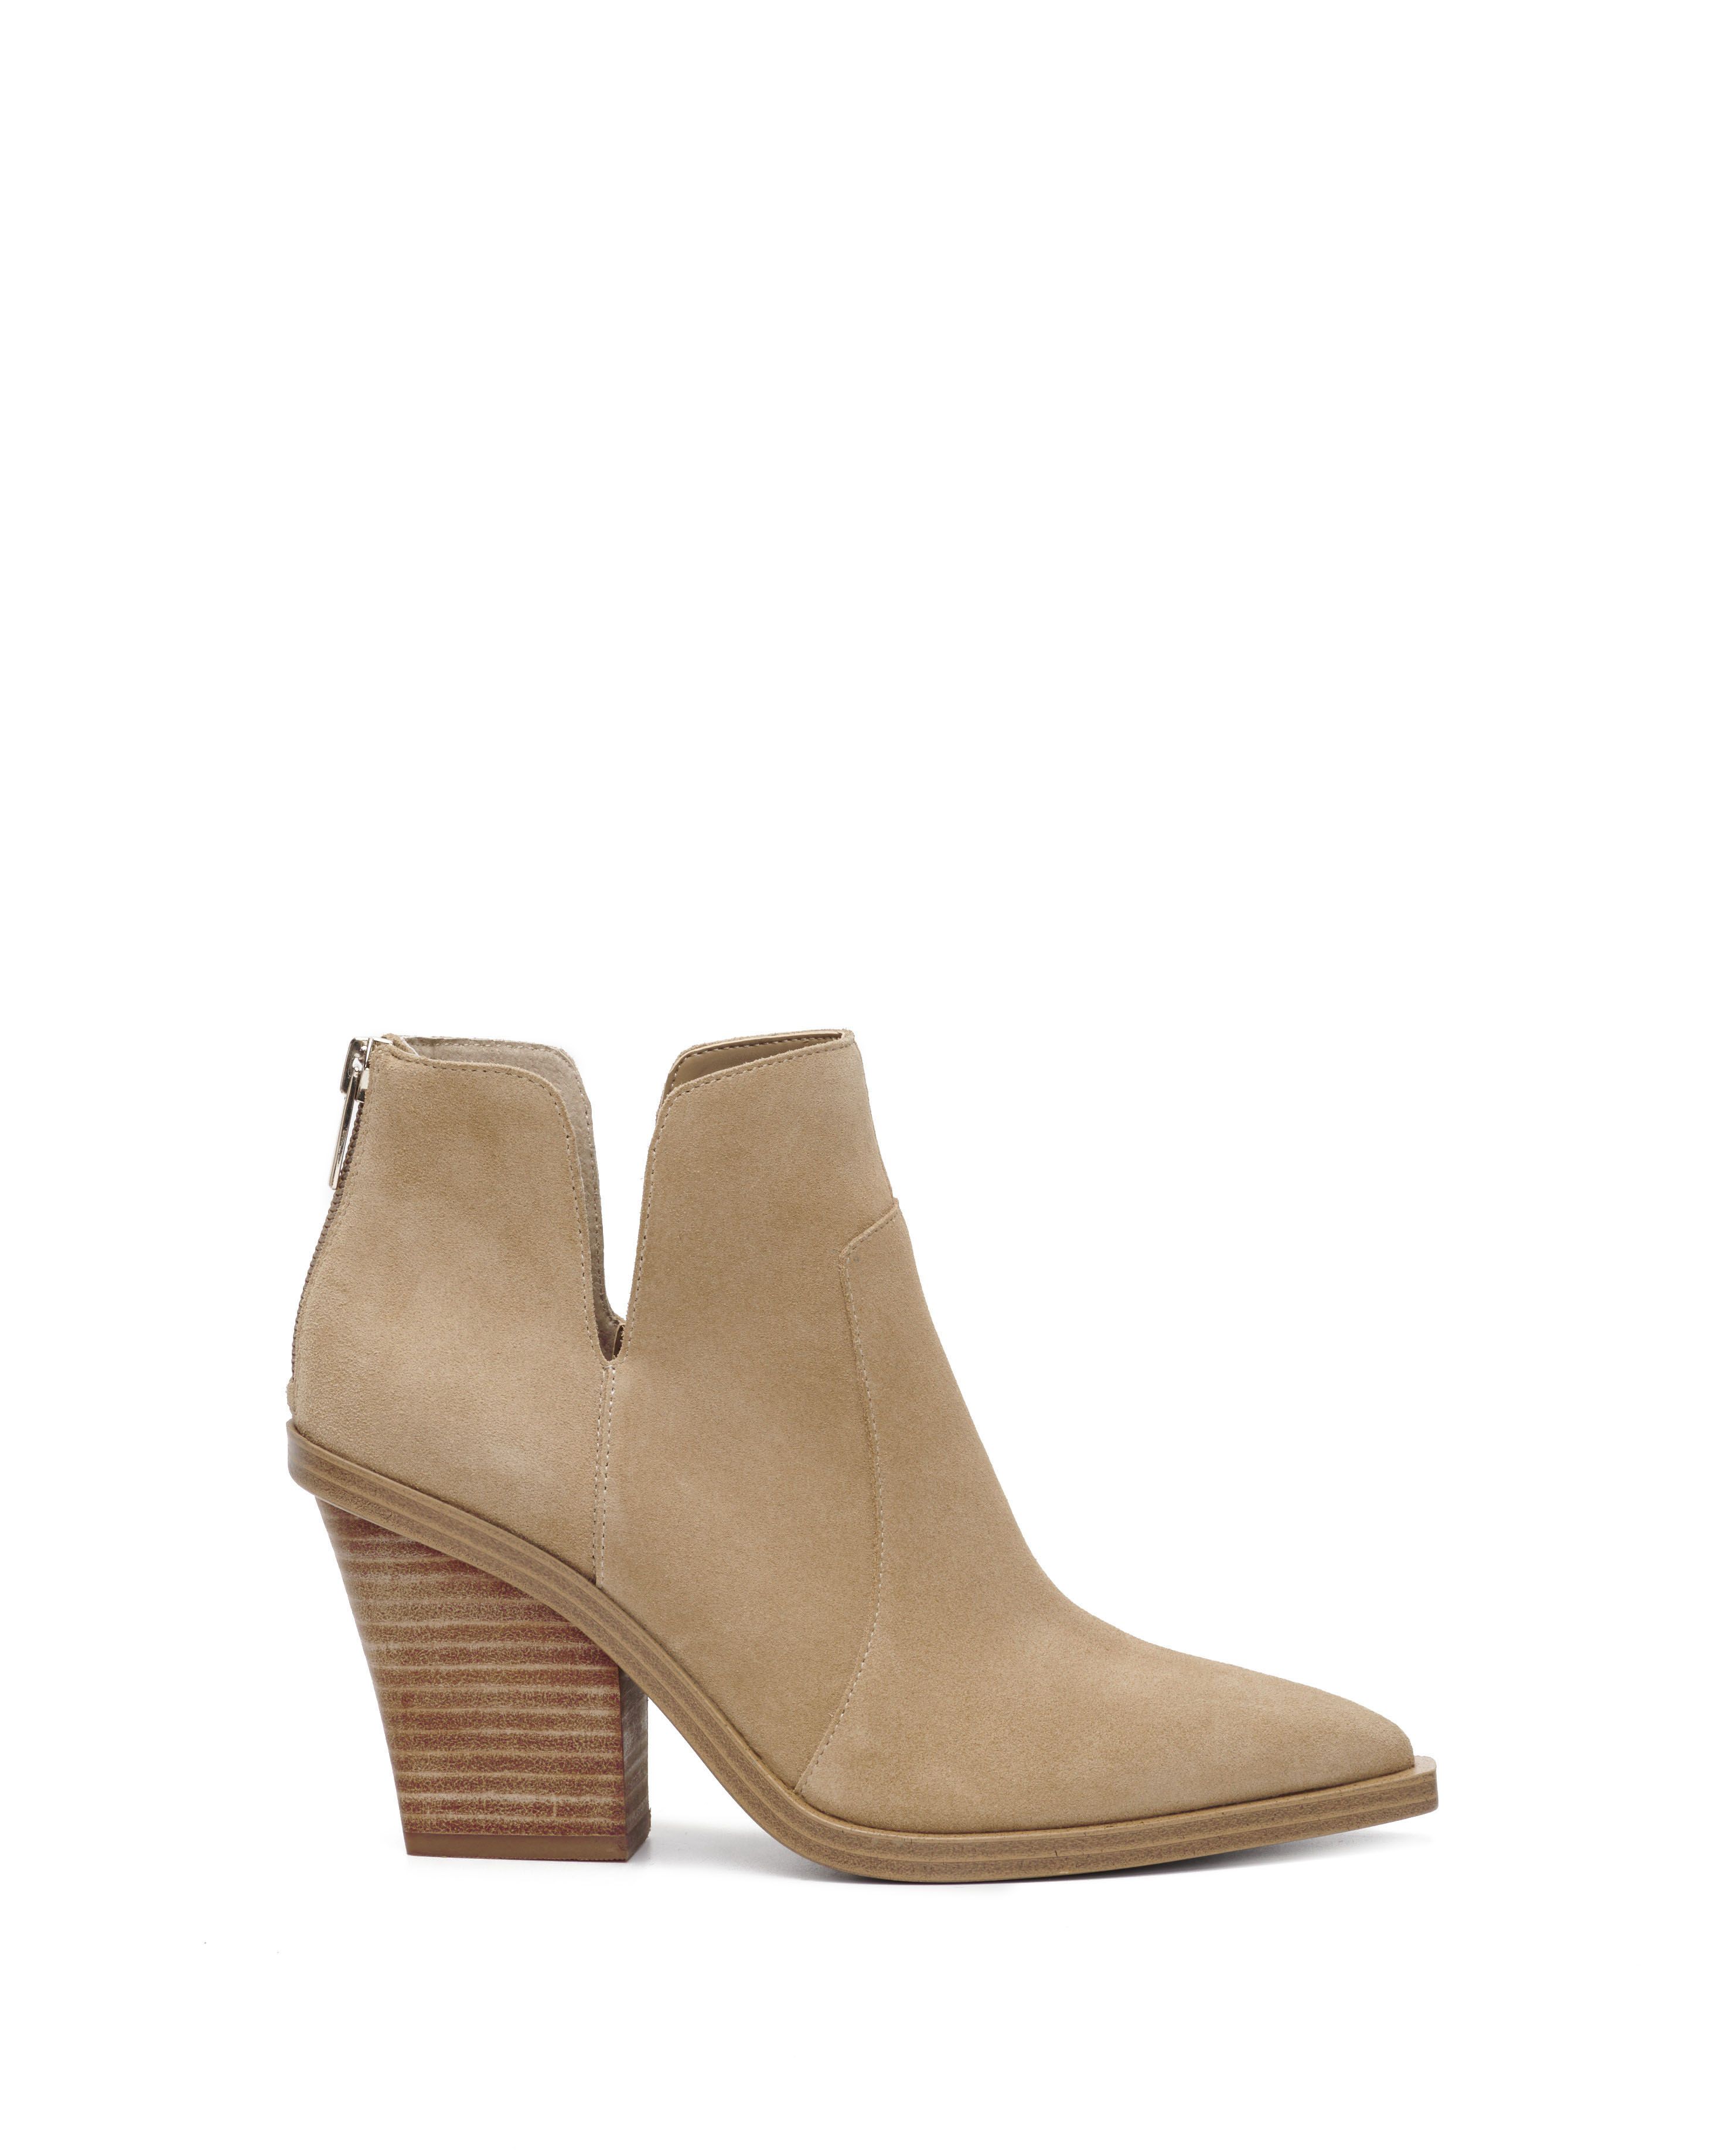 Vince Camuto Gwelona Bootie | Vince Camuto